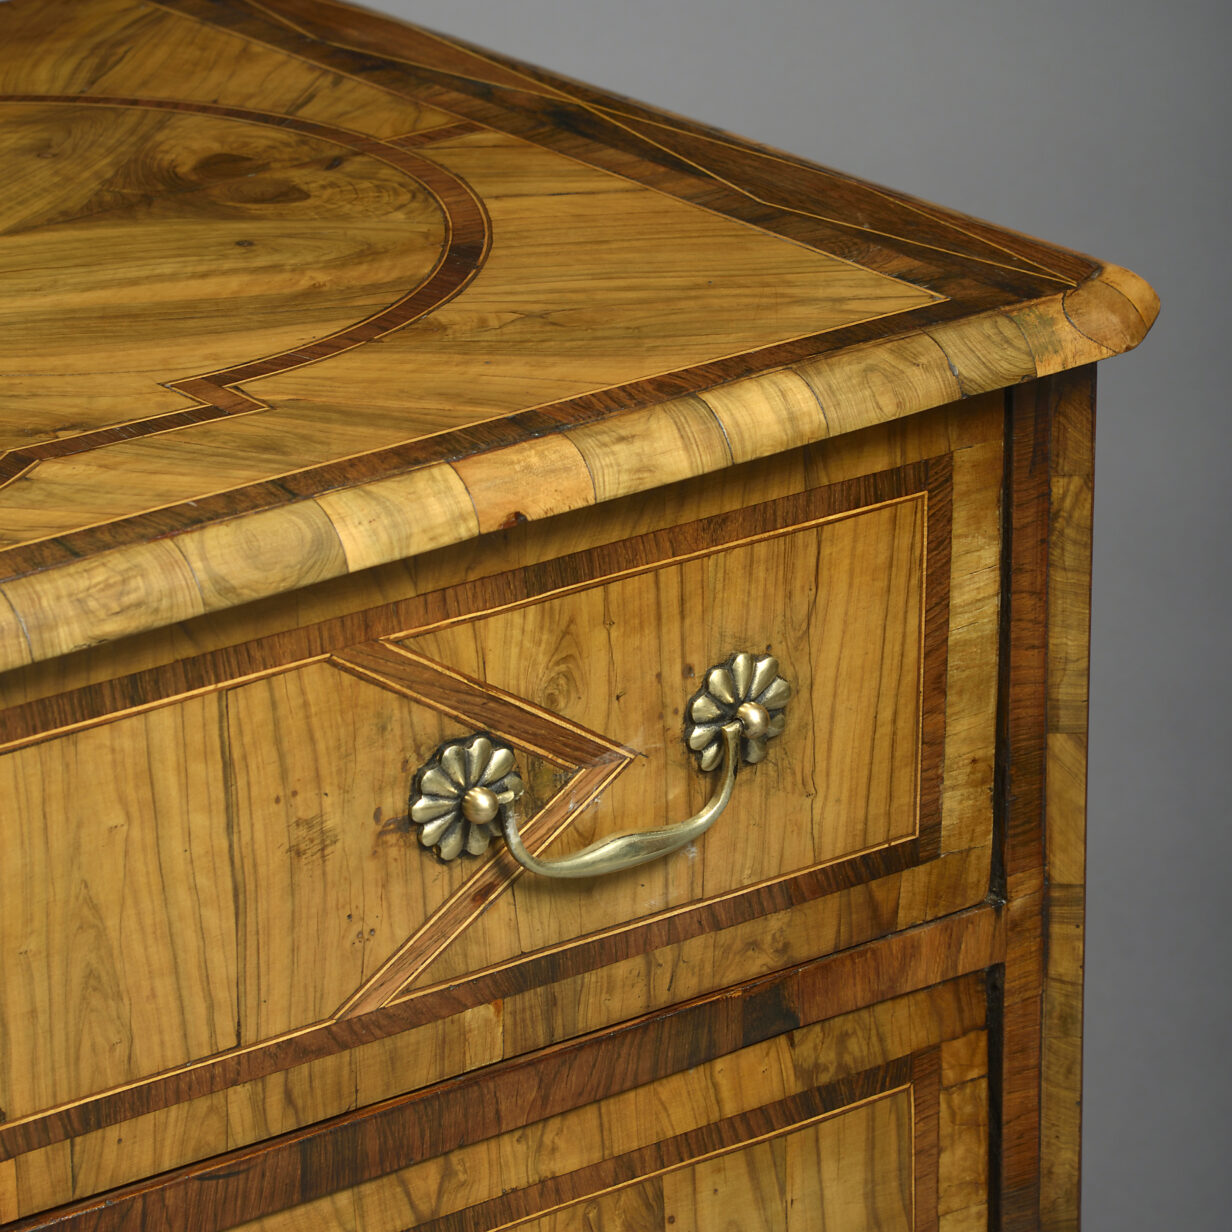 Late 18th century olivewood parquetry commode